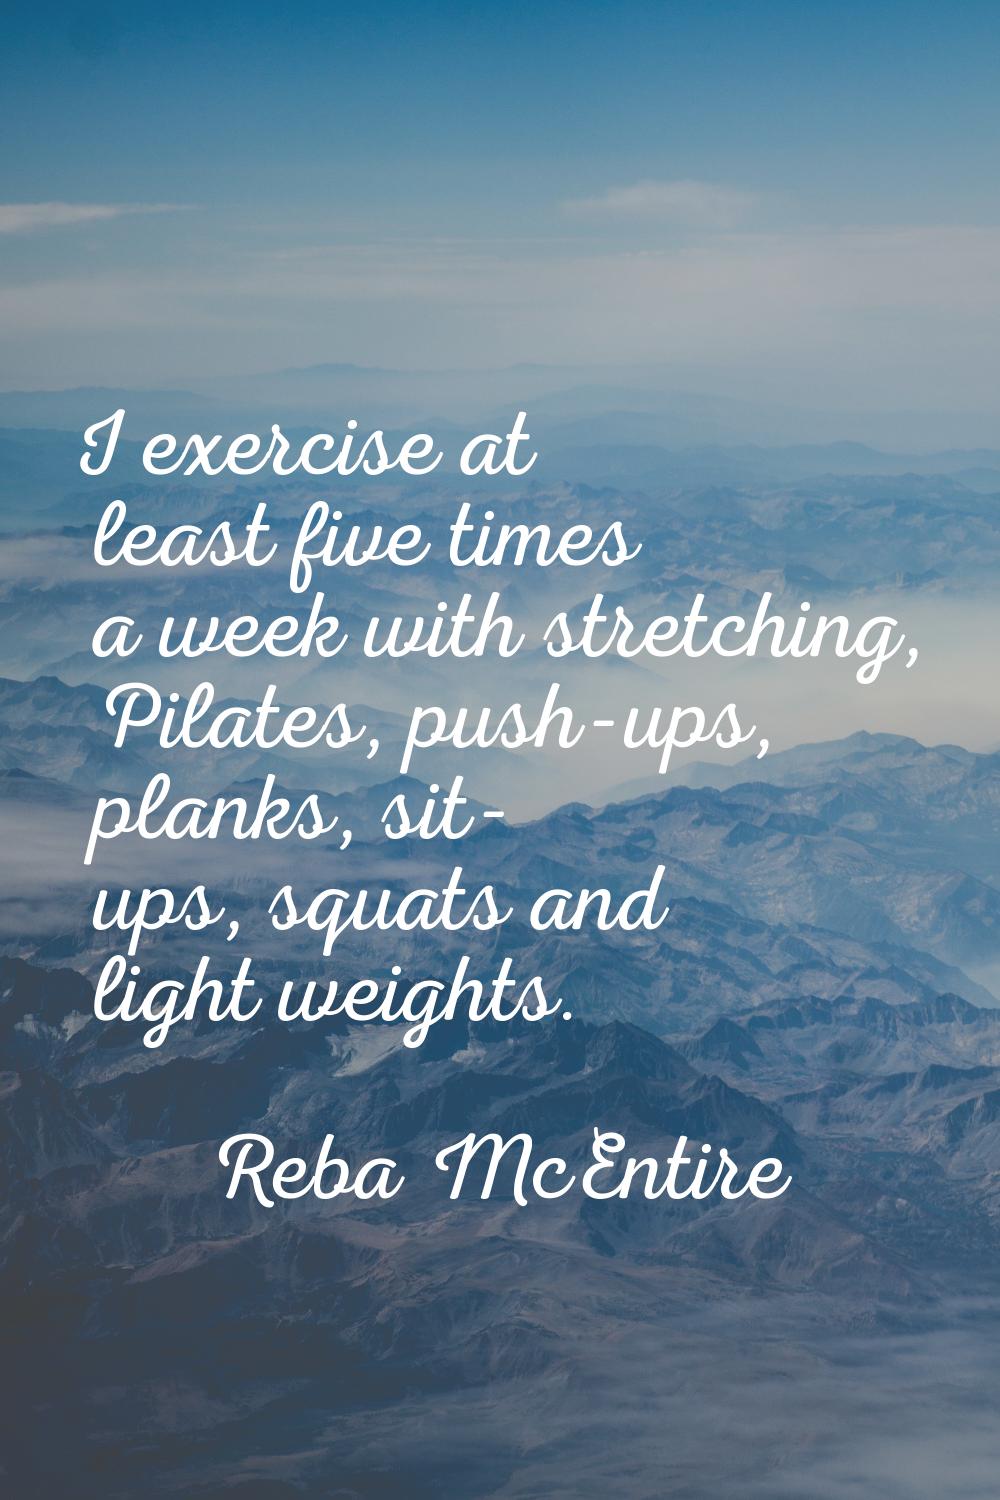 I exercise at least five times a week with stretching, Pilates, push-ups, planks, sit- ups, squats 